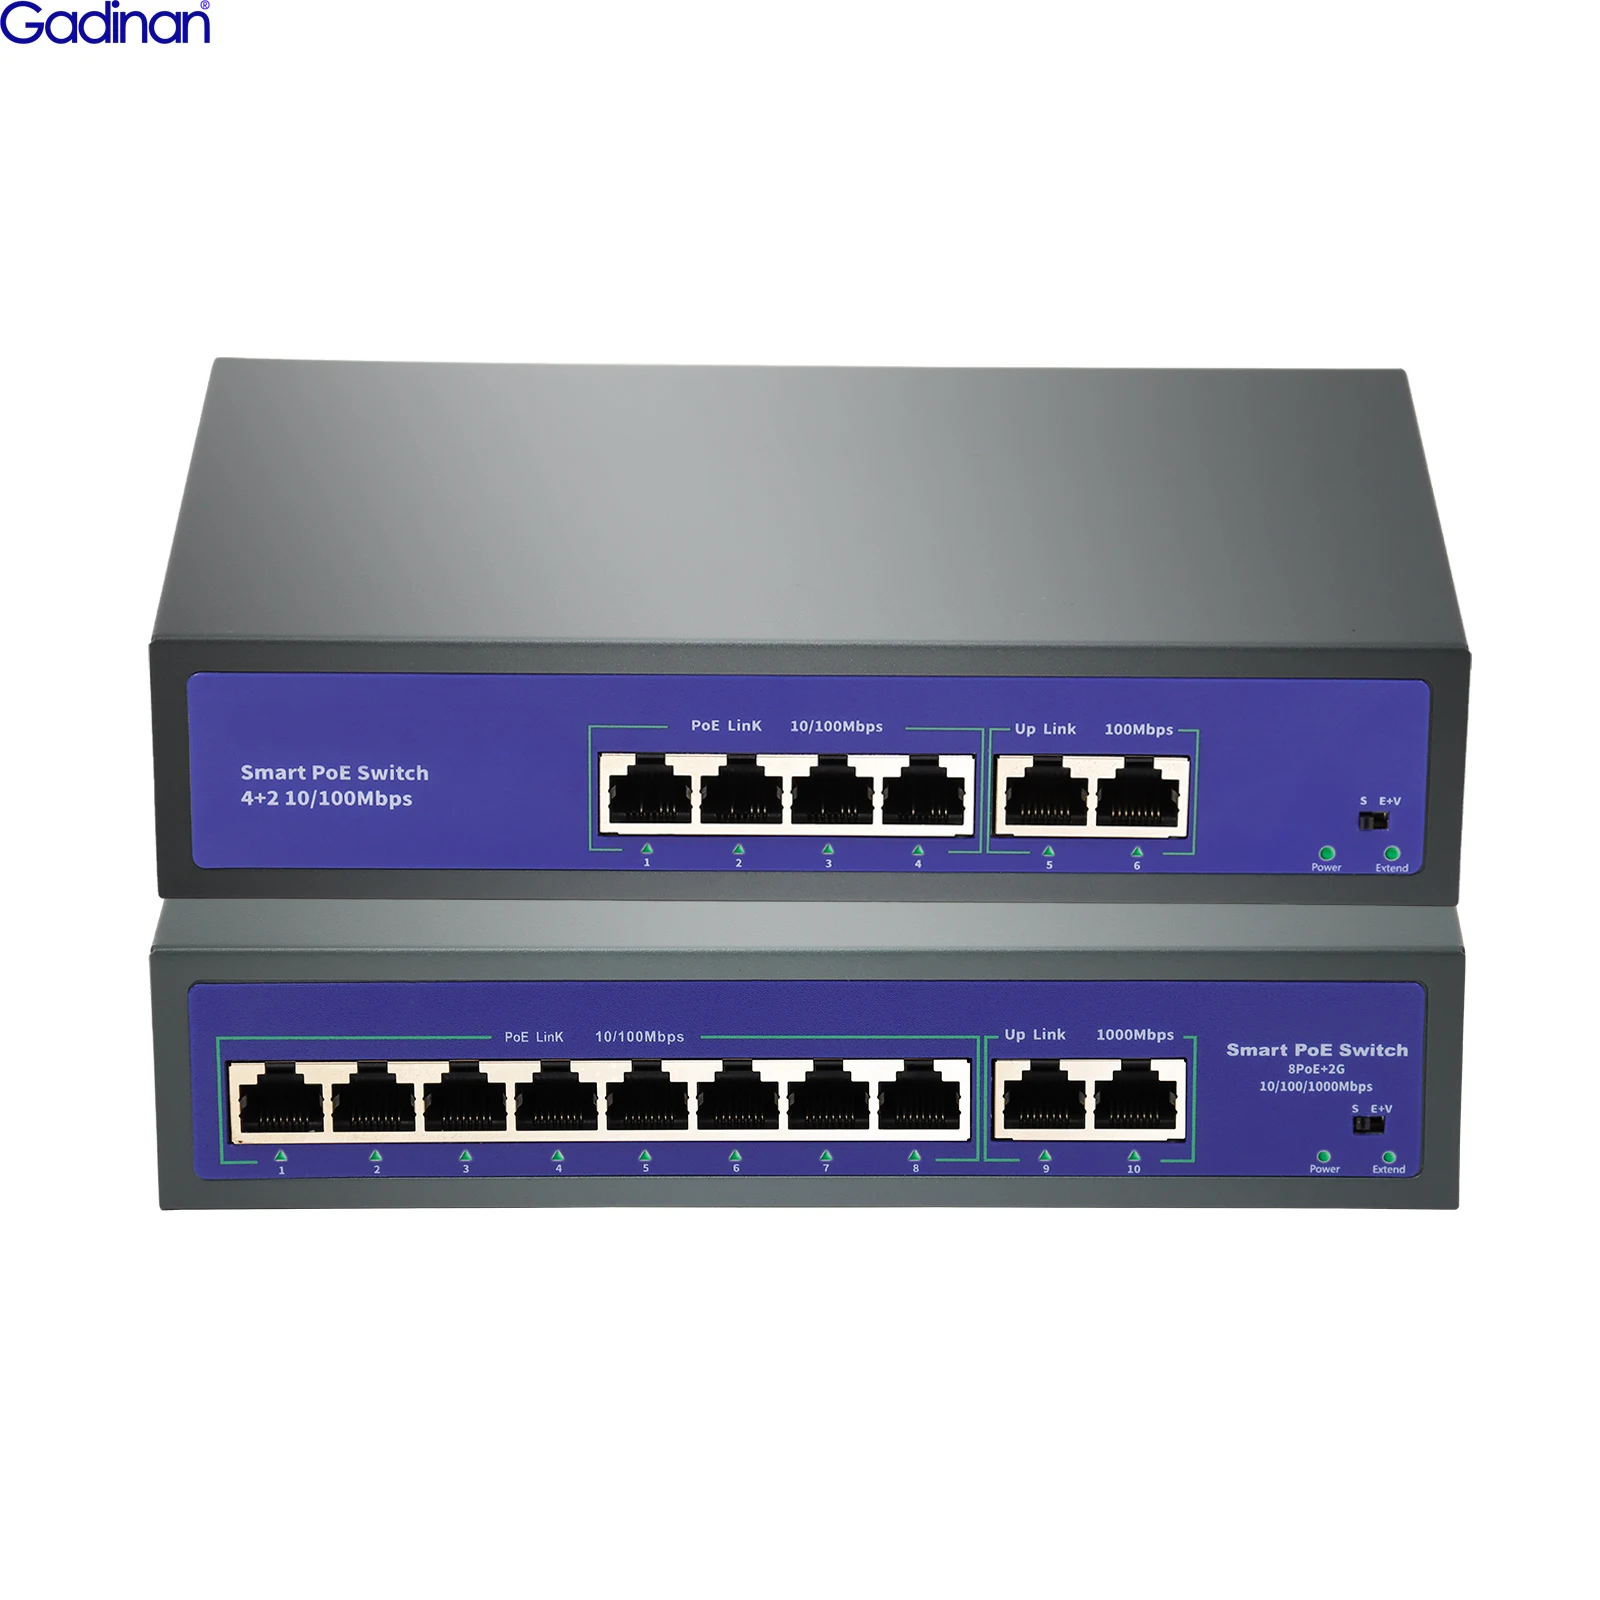 

Over Ethernet IP CCTV Camera 4/8 Ports 48-52V Network POE Switch With 10/1000Mbps IEEE 802.3 af/at Wireless AP Security System